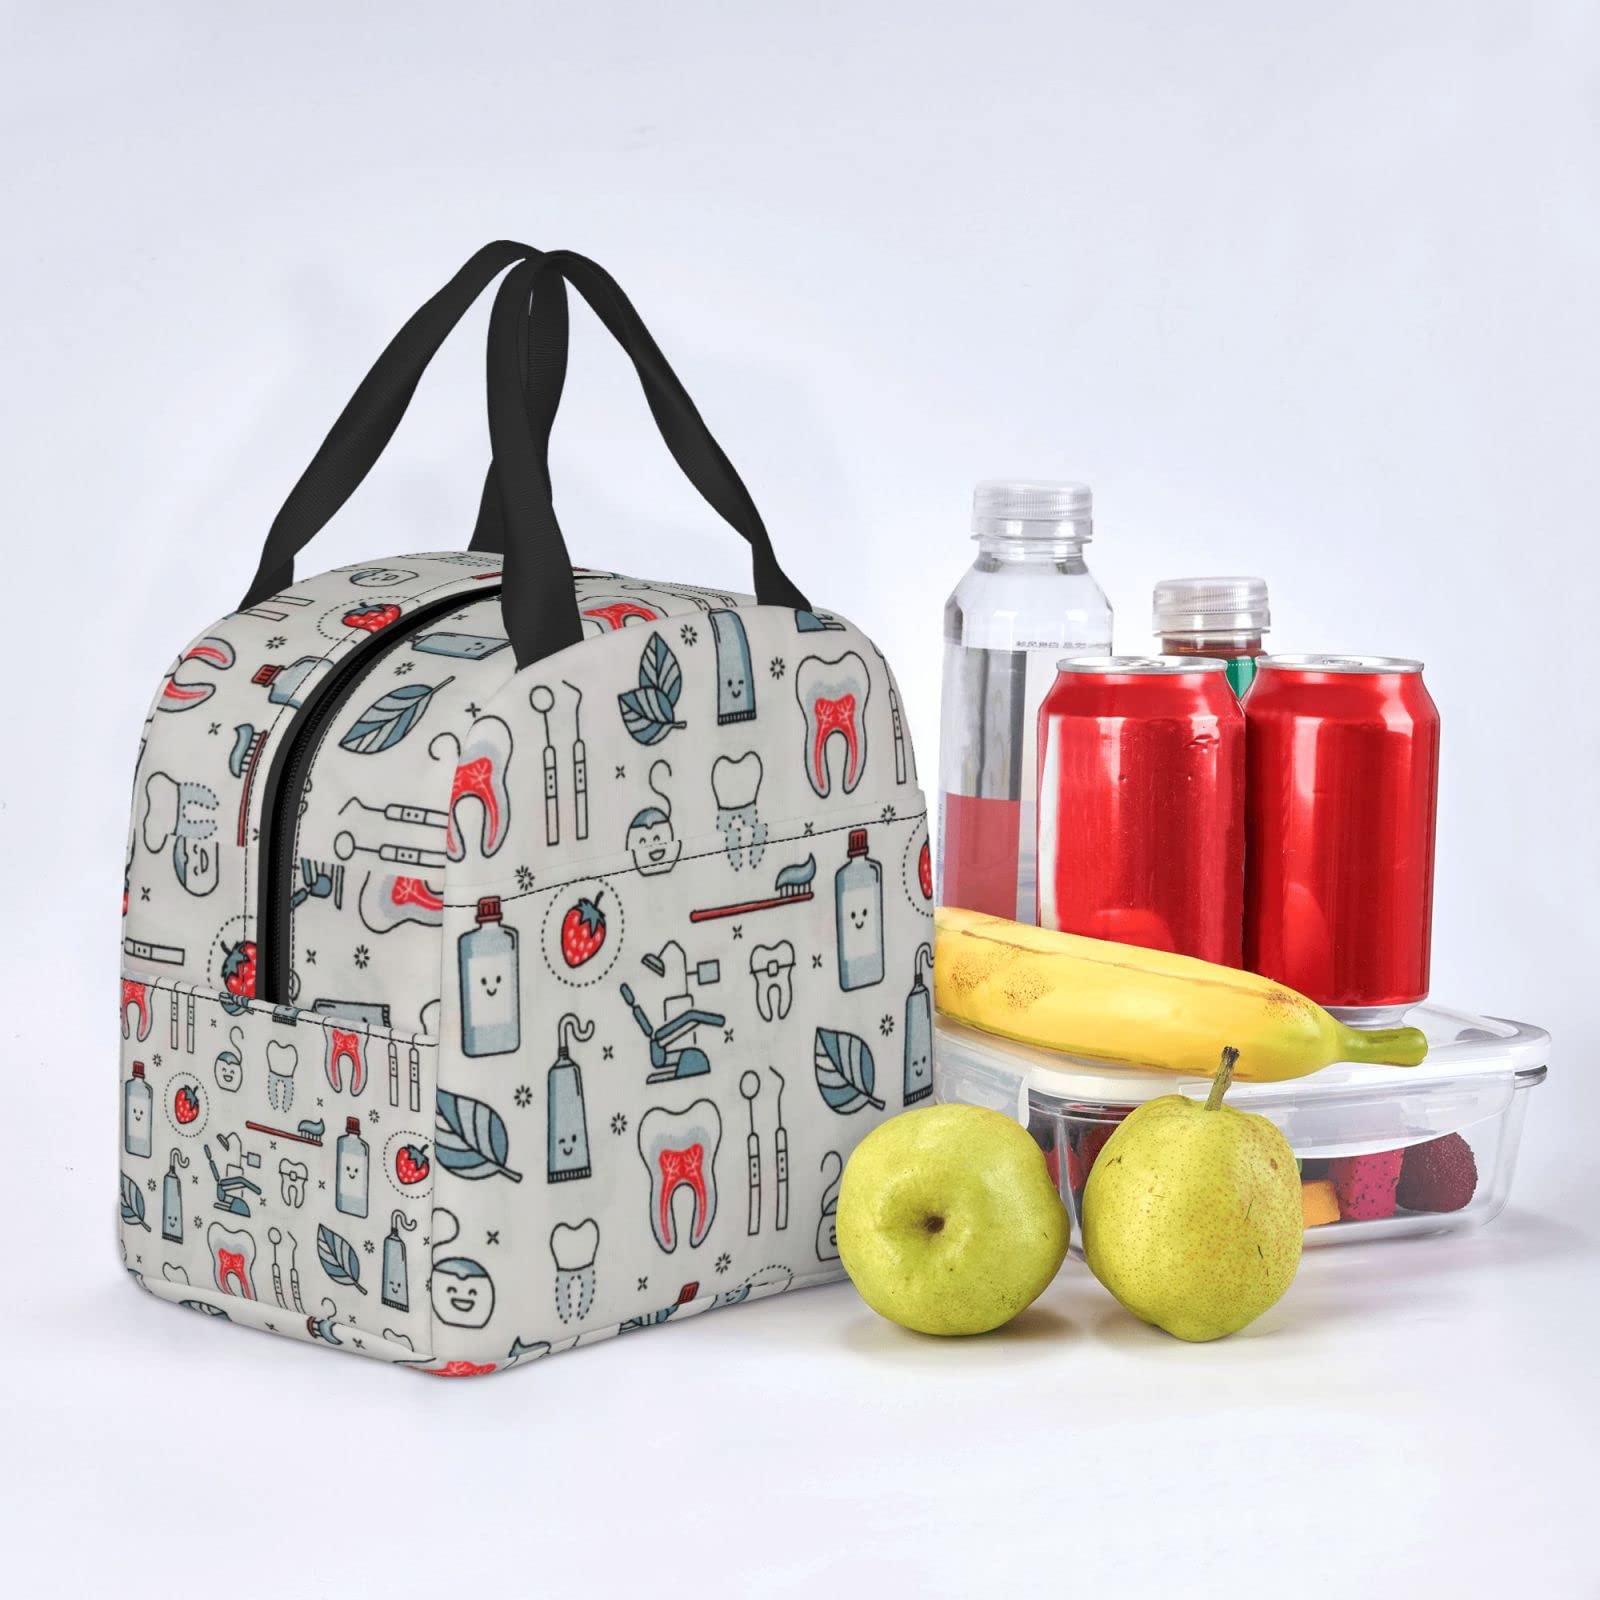 SXIKON Dentist Lunch Bag Dental Hygienist Lunch Box for Women & Men Insulated Picnic Pouch Thermal Cooler Cute Tote Bag for Work Camping Travel, One Size